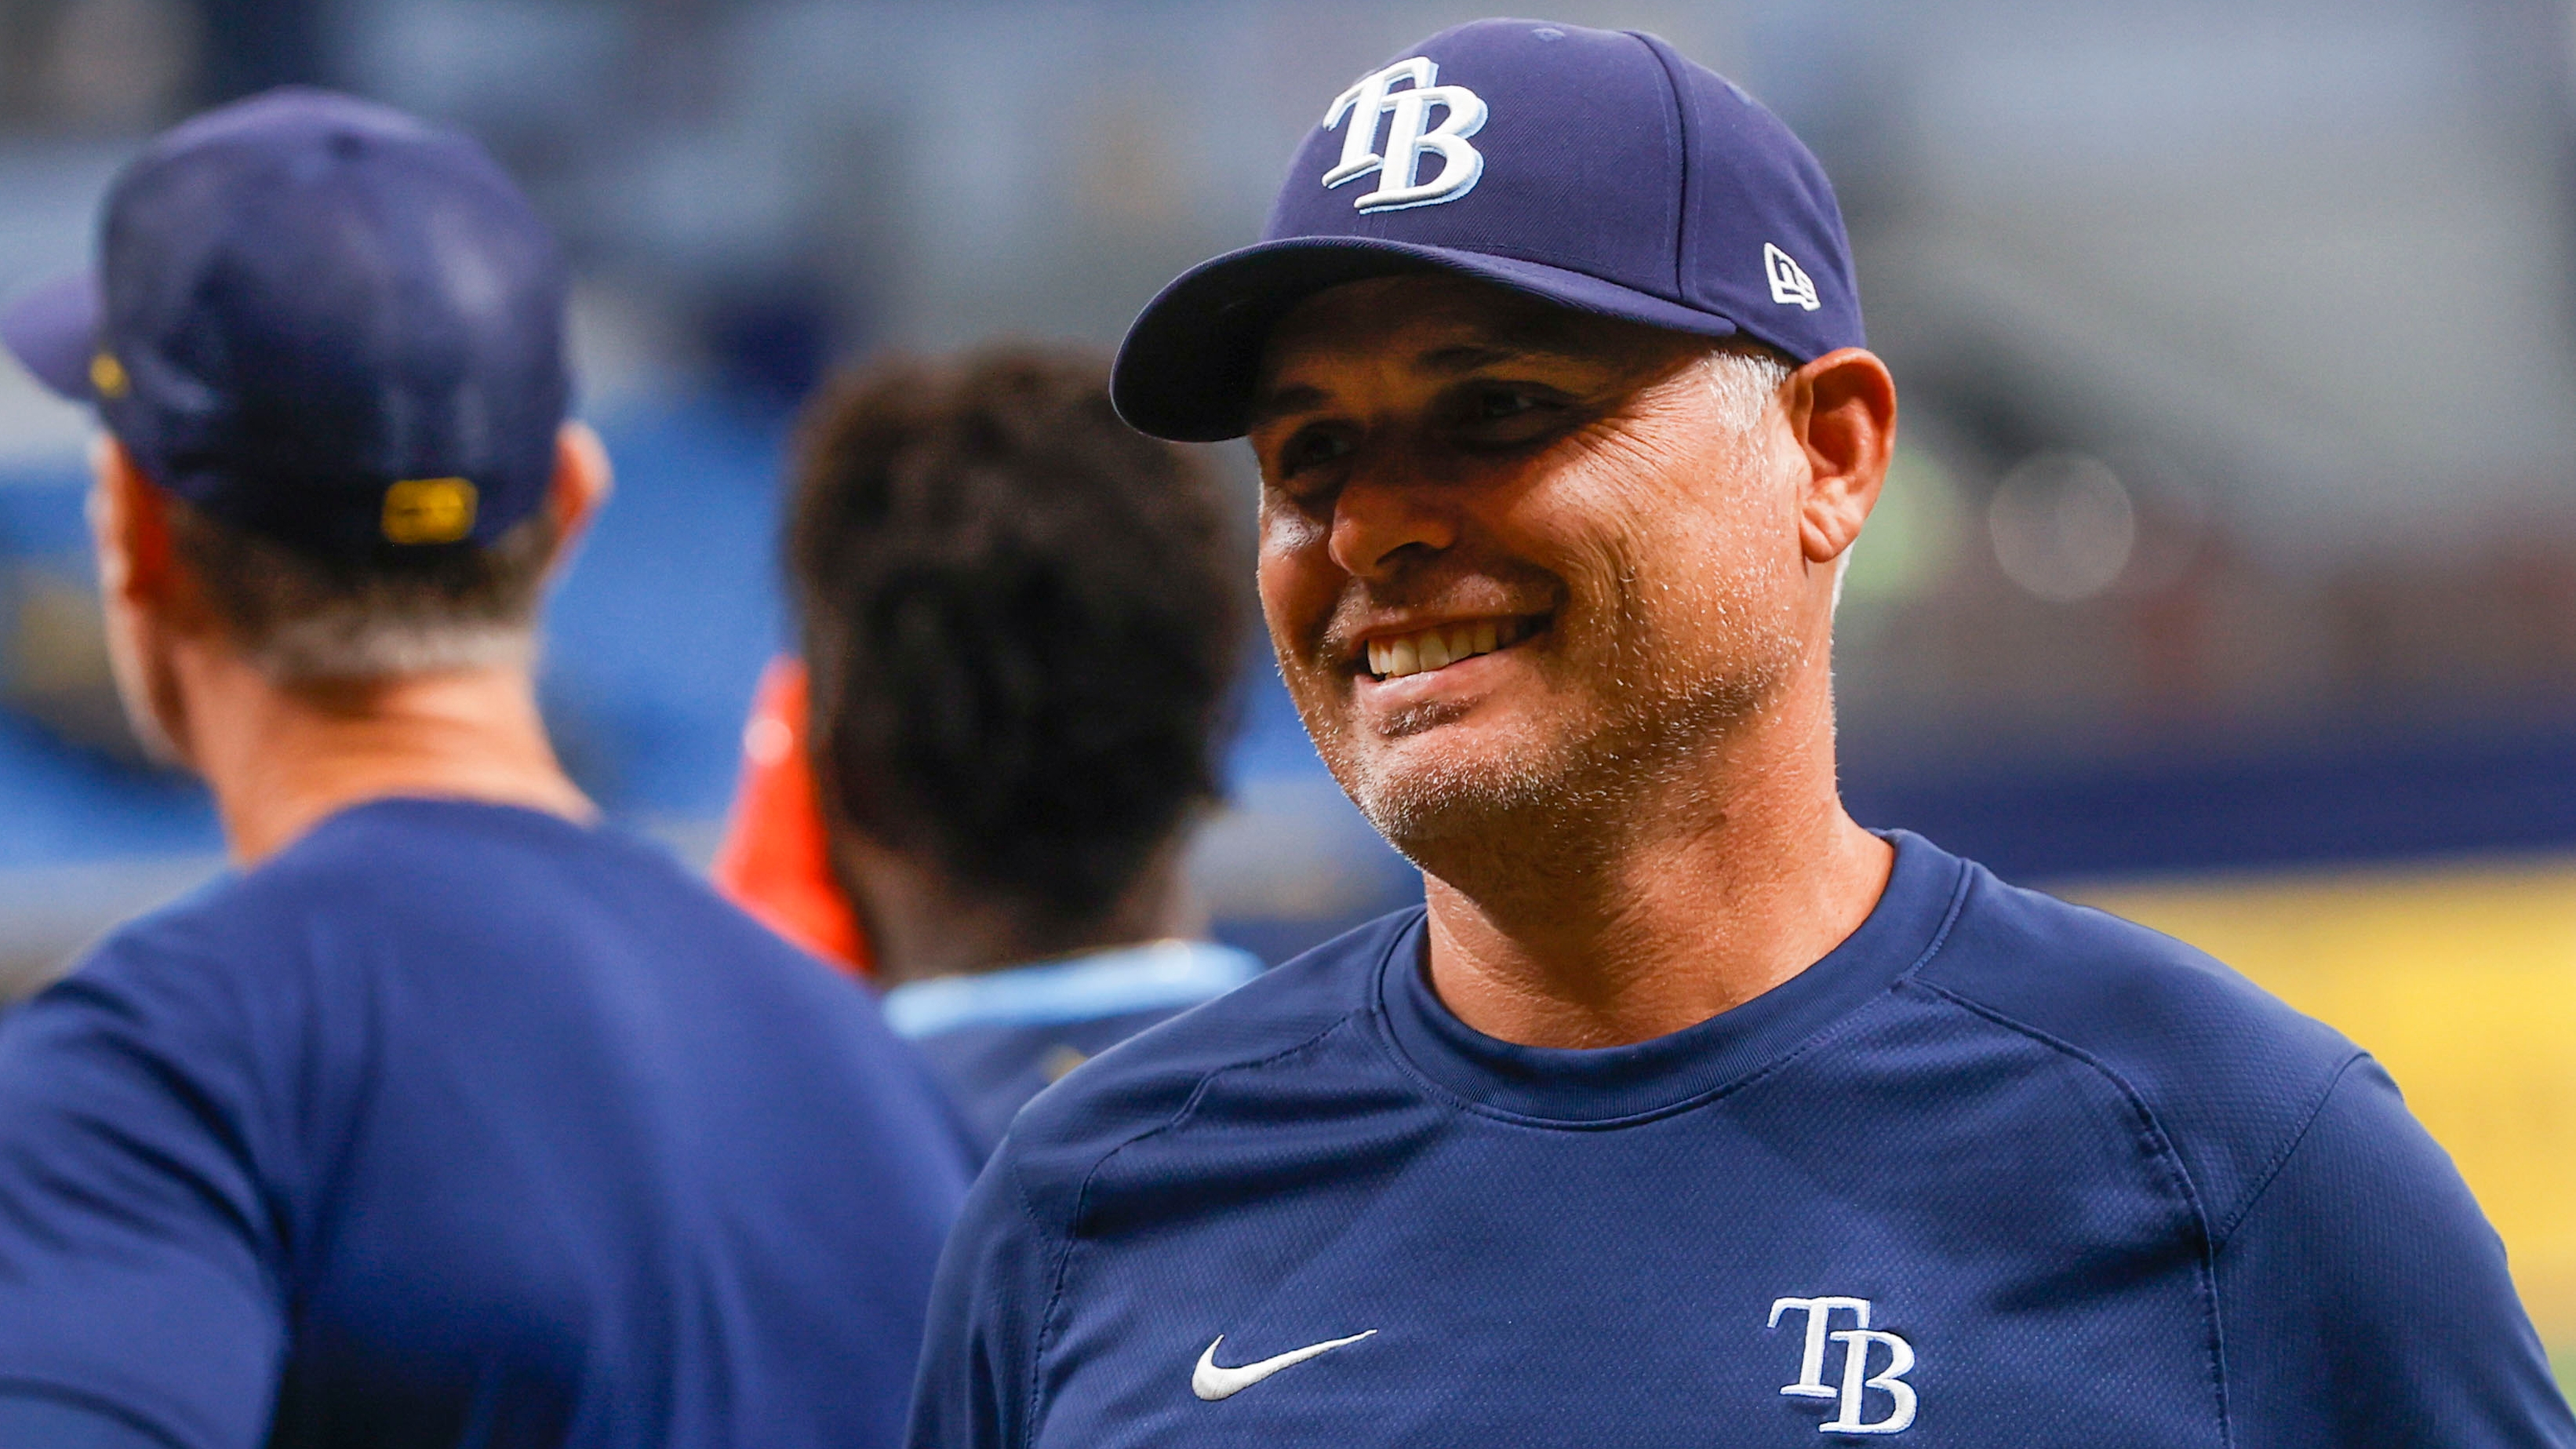 With Kevin Cash reaching 700 wins, we asked his Rays what makes him good